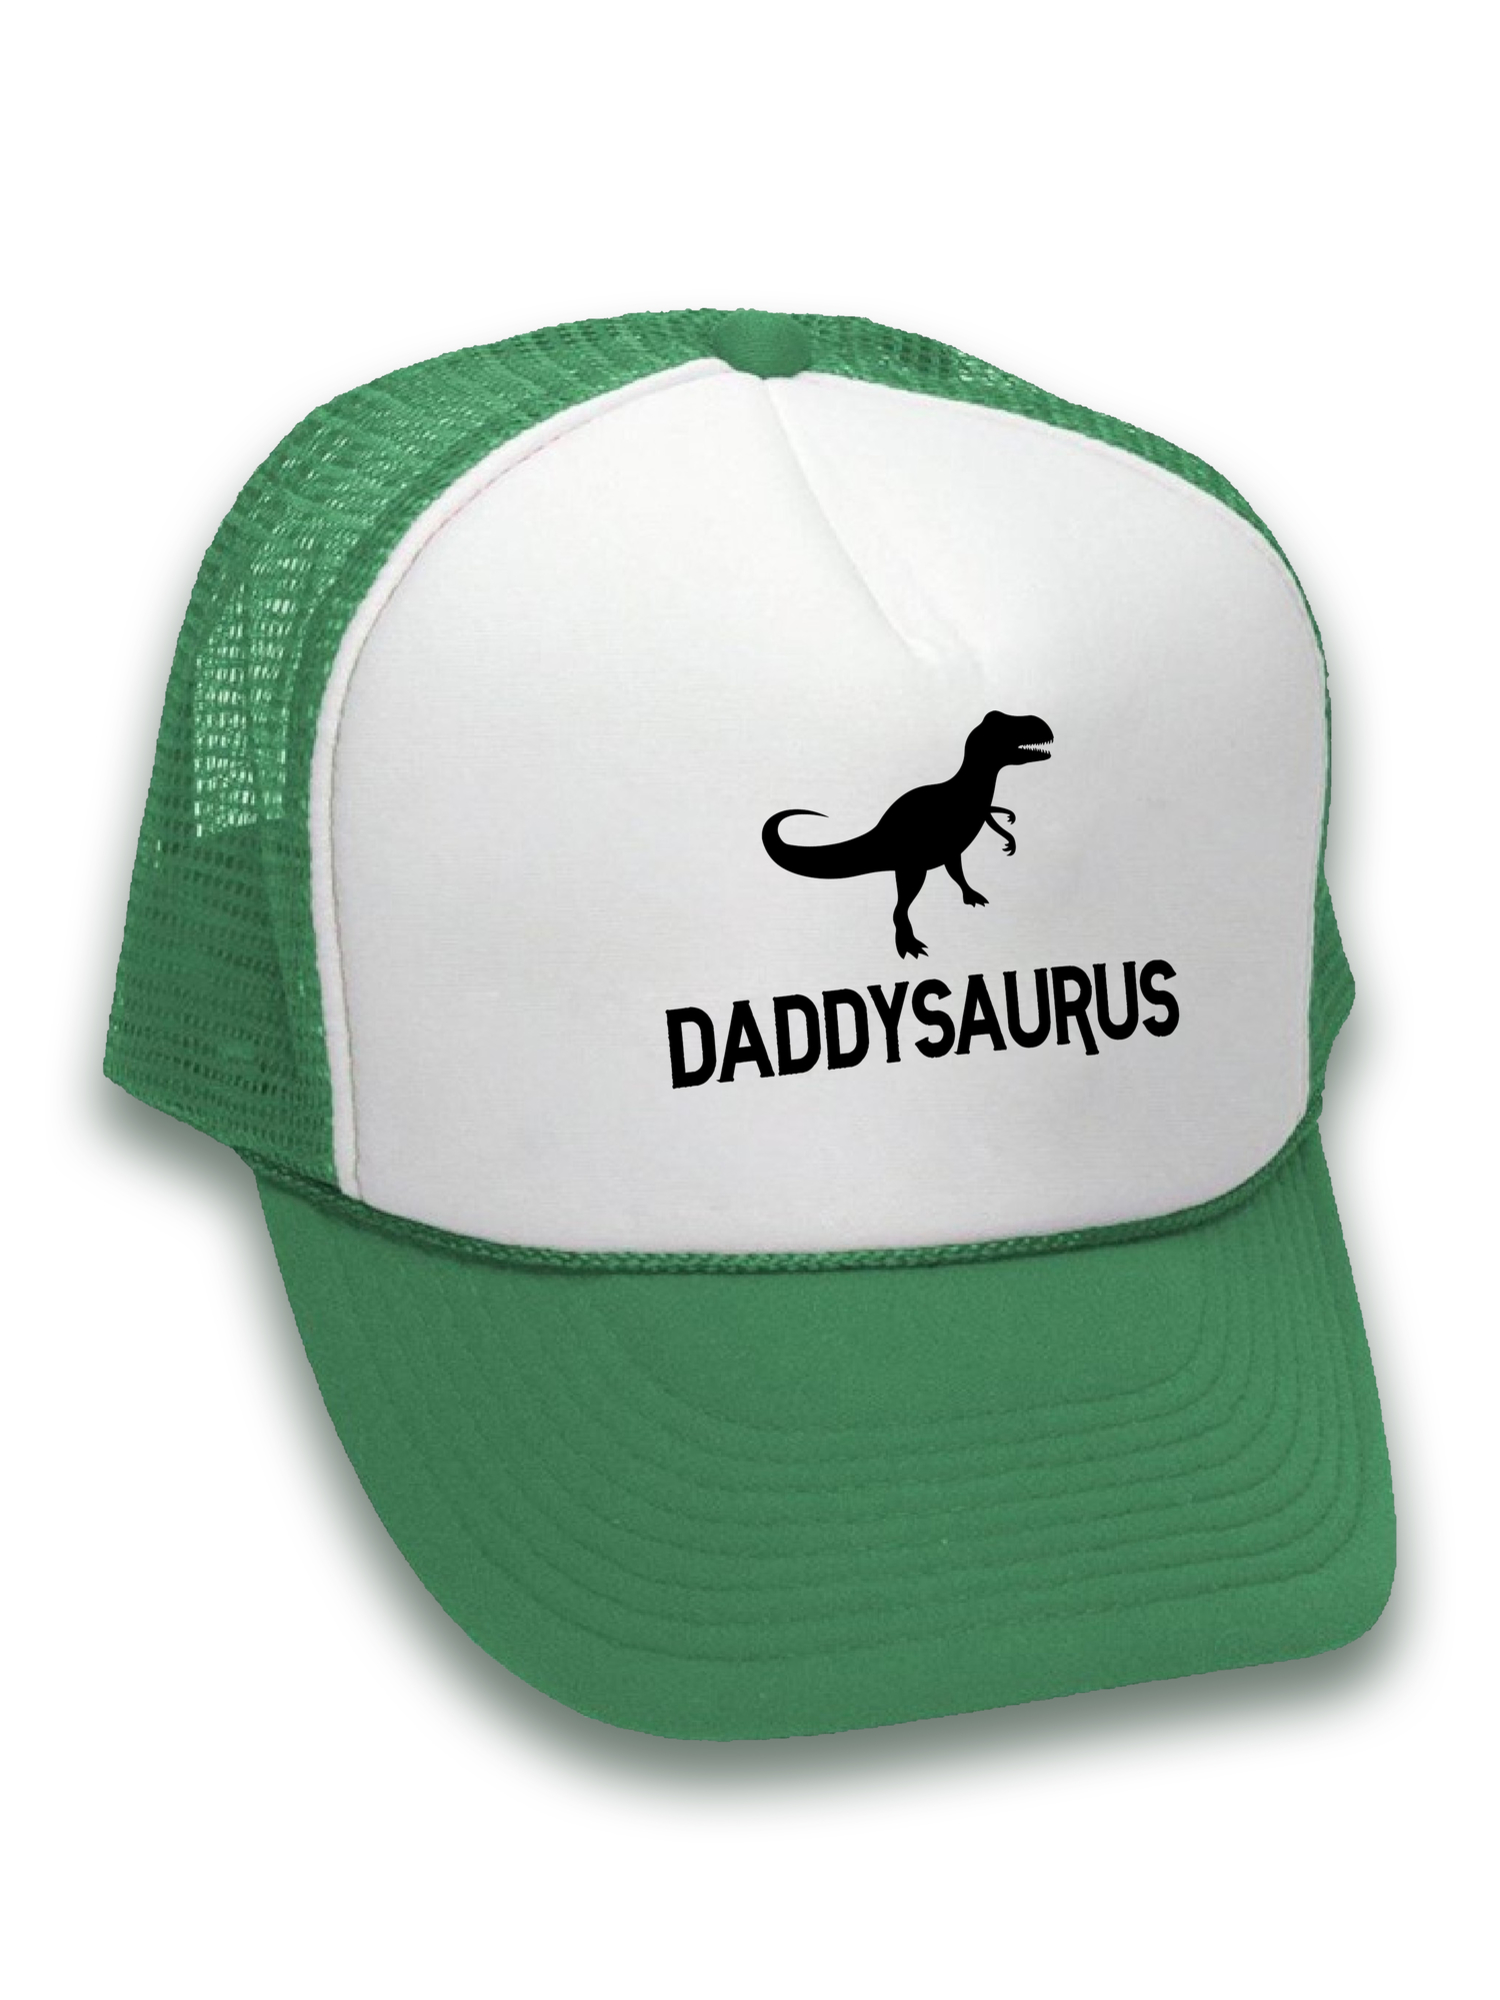 Awkward Styles Daddysaurus Hat Dinosaur Dad Trucker Hat Funny Dad Gifts for Father's Day Geek Dad Snapback Hat Hat Accessories for Dad Dinosaur Gifts for Dad Father Trucker Hat Daddy Cap Funny Dad Hat - image 2 of 6